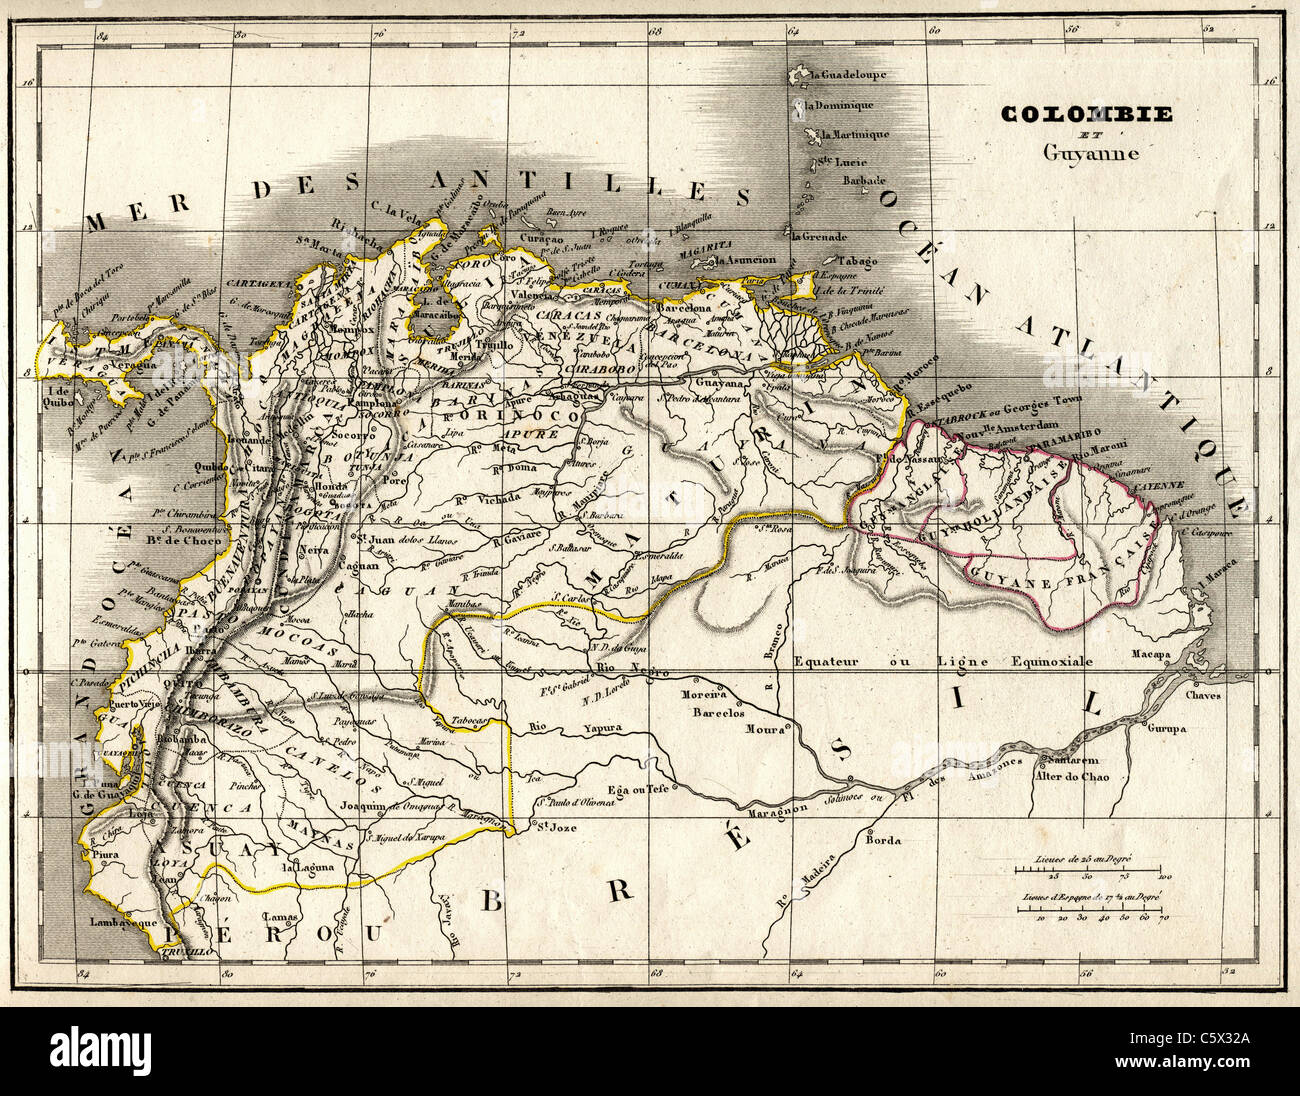 Colombie et Guyanne (Colombia and Guyana) Antiquarian Map from 'Atlas Universel de Geographie Ancienne and Moderne' by cartographer C. V. Monin Stock Photo